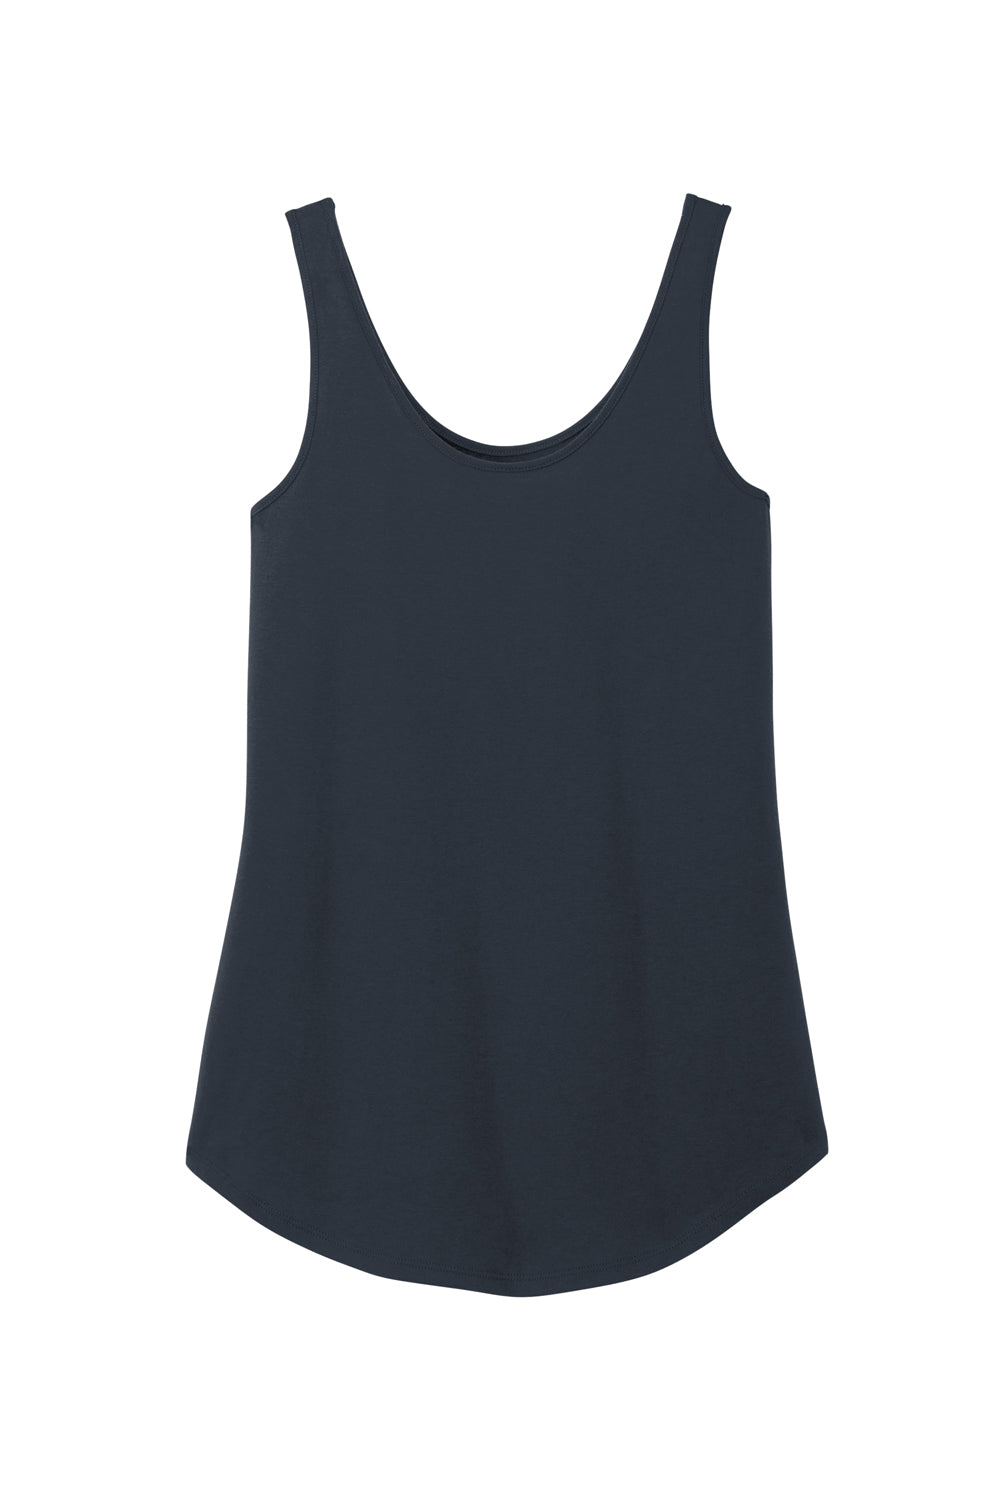 District DT151 Womens Perfect Tri Relaxed Tank Top New Navy Blue Flat Back